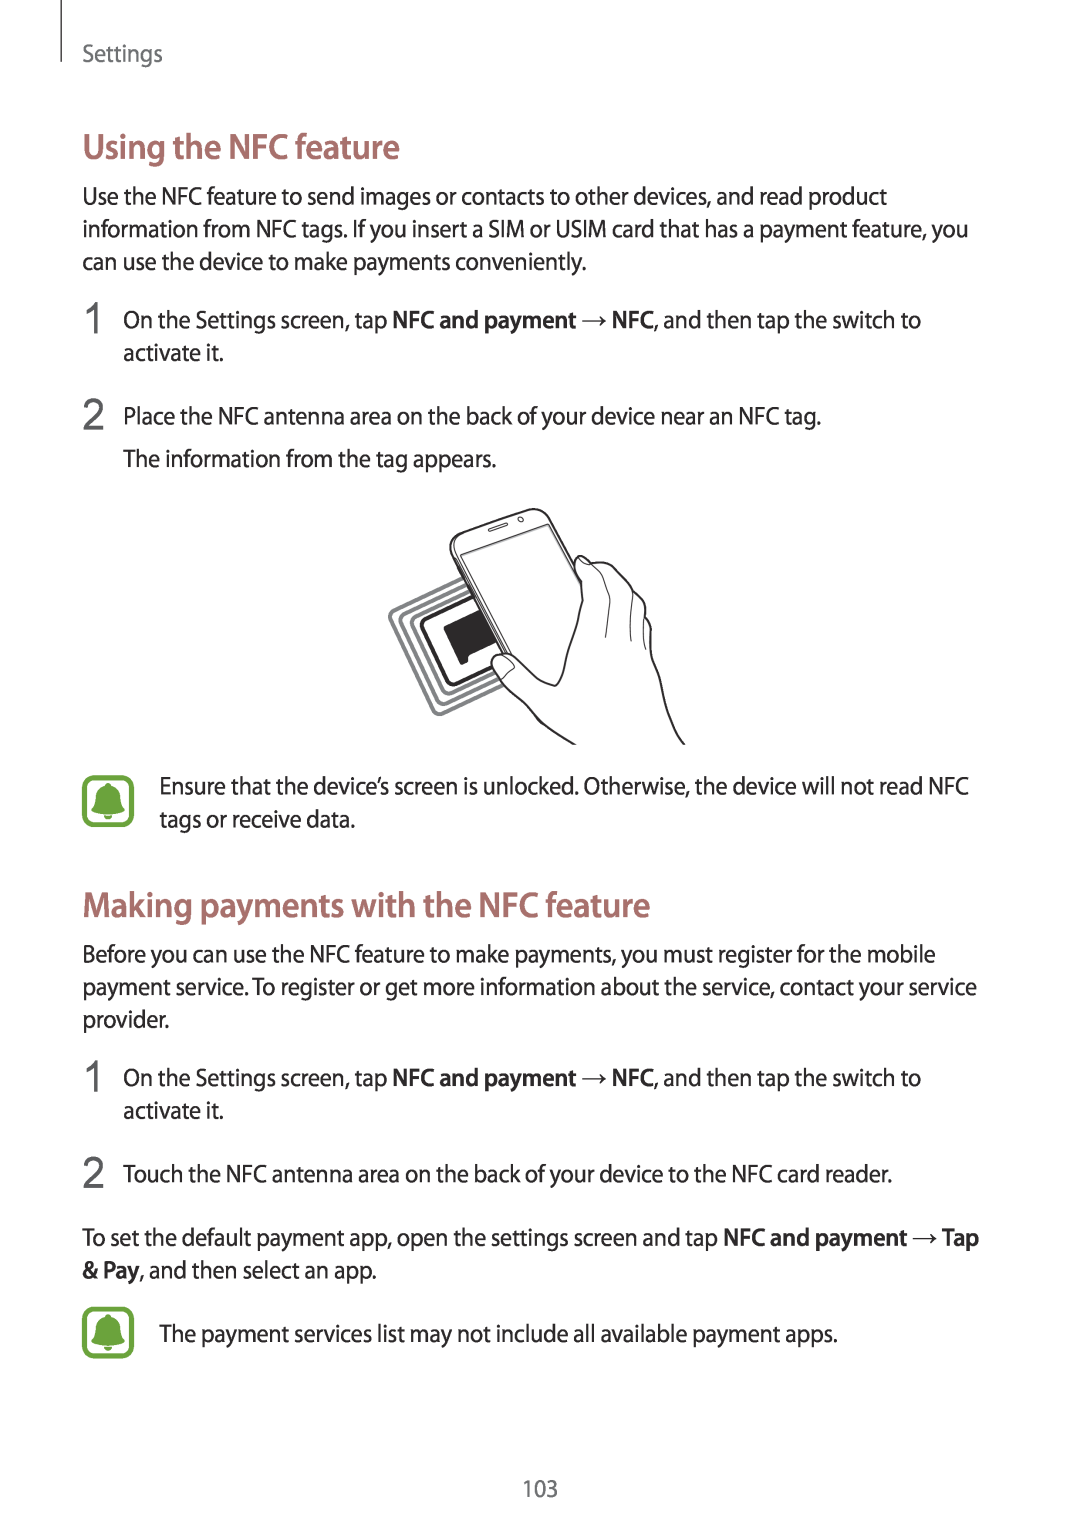 Samsung CG-G920FZDRVTC, SM-G920FZKFDBT manual Using the NFC feature, Making payments with the NFC feature, Settings 